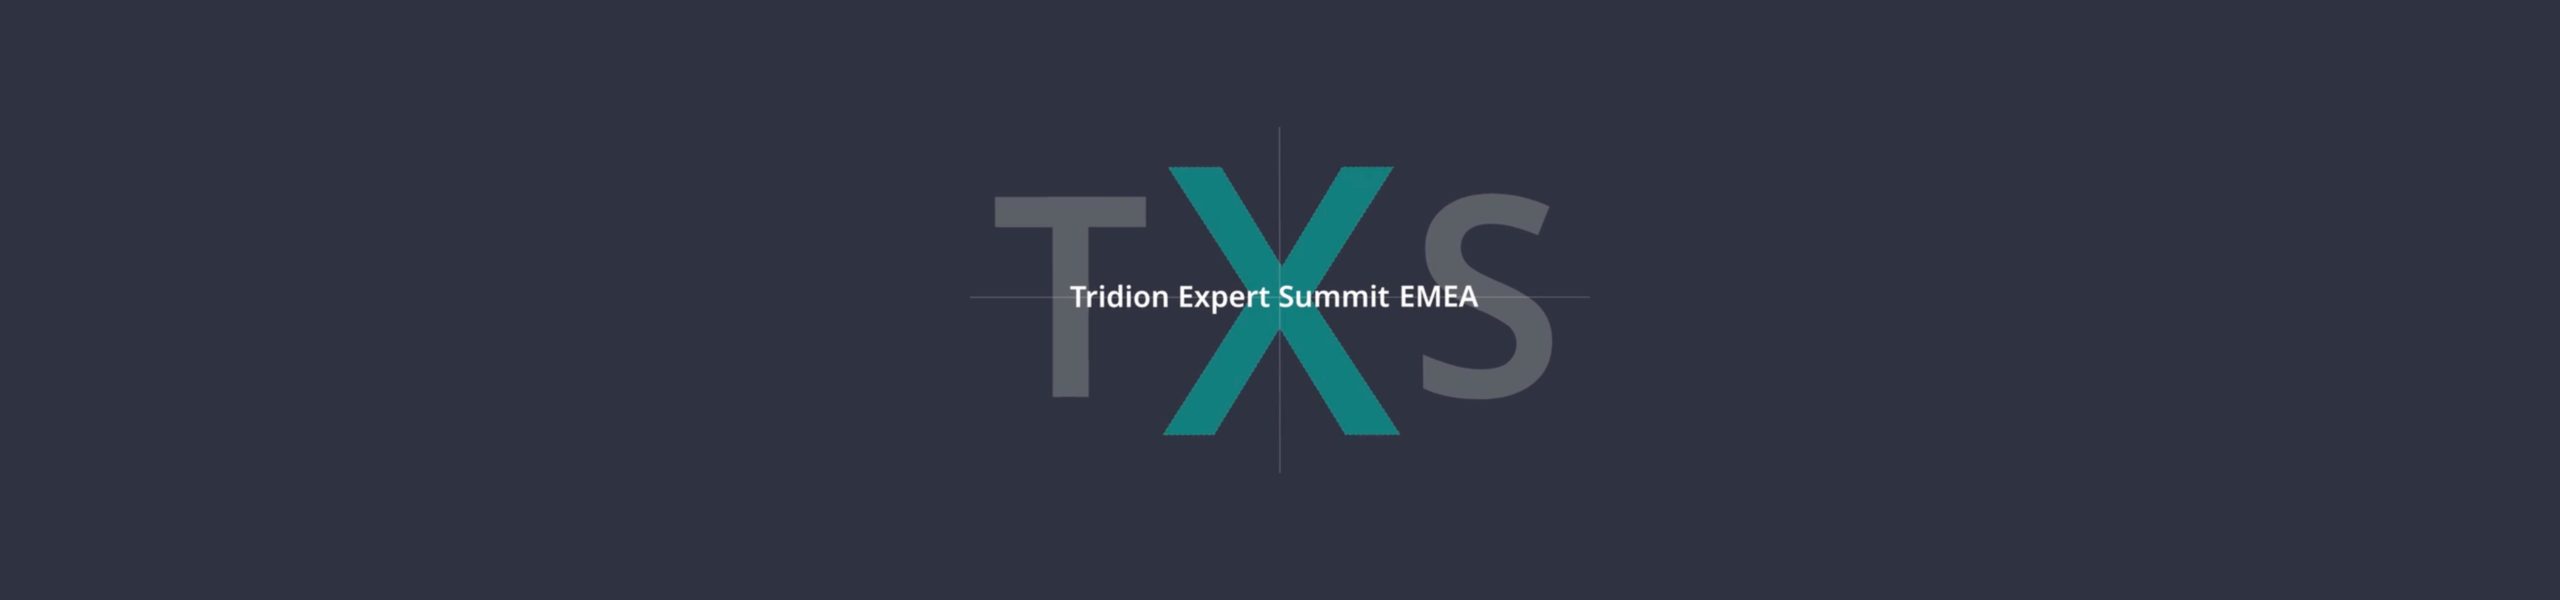 https://www.contentbloom.com/wp-content/uploads/2021/12/What-you-missed-at-Day-1-of-the-Tridion-Expert-Summit-2021-2-scaled.jpg